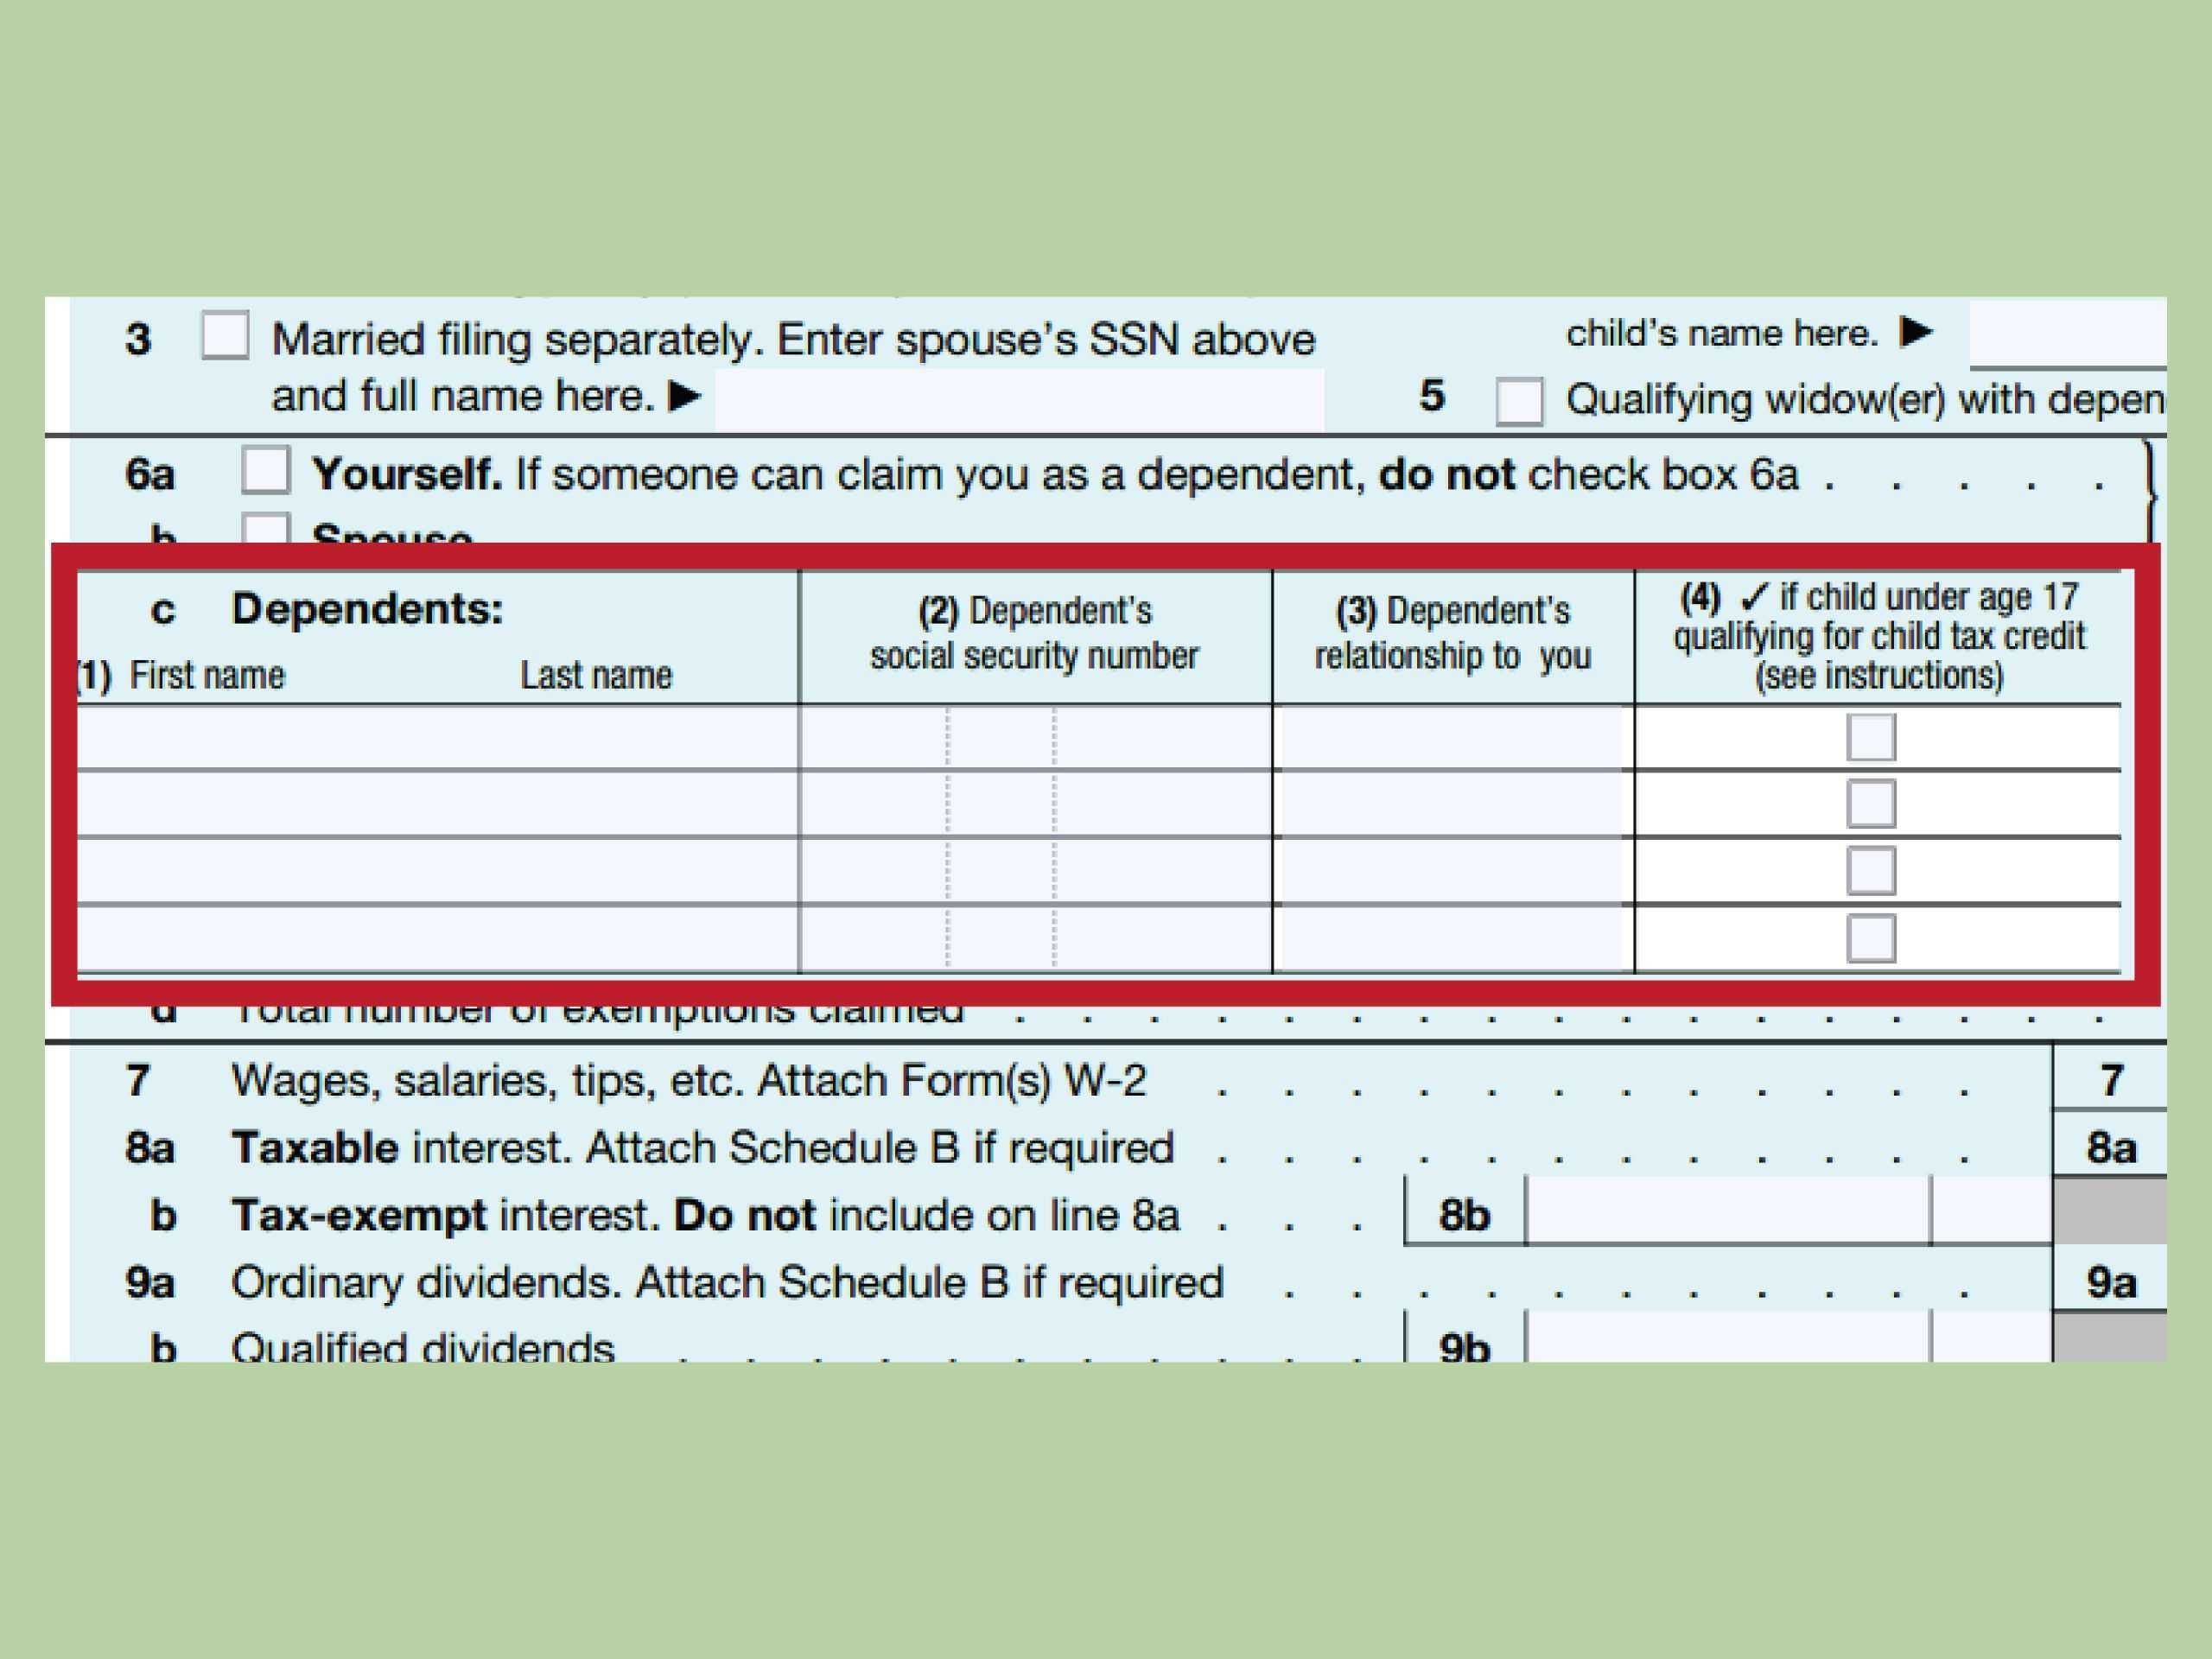 How to Fill Out a US 1040X Tax Return (with Form)